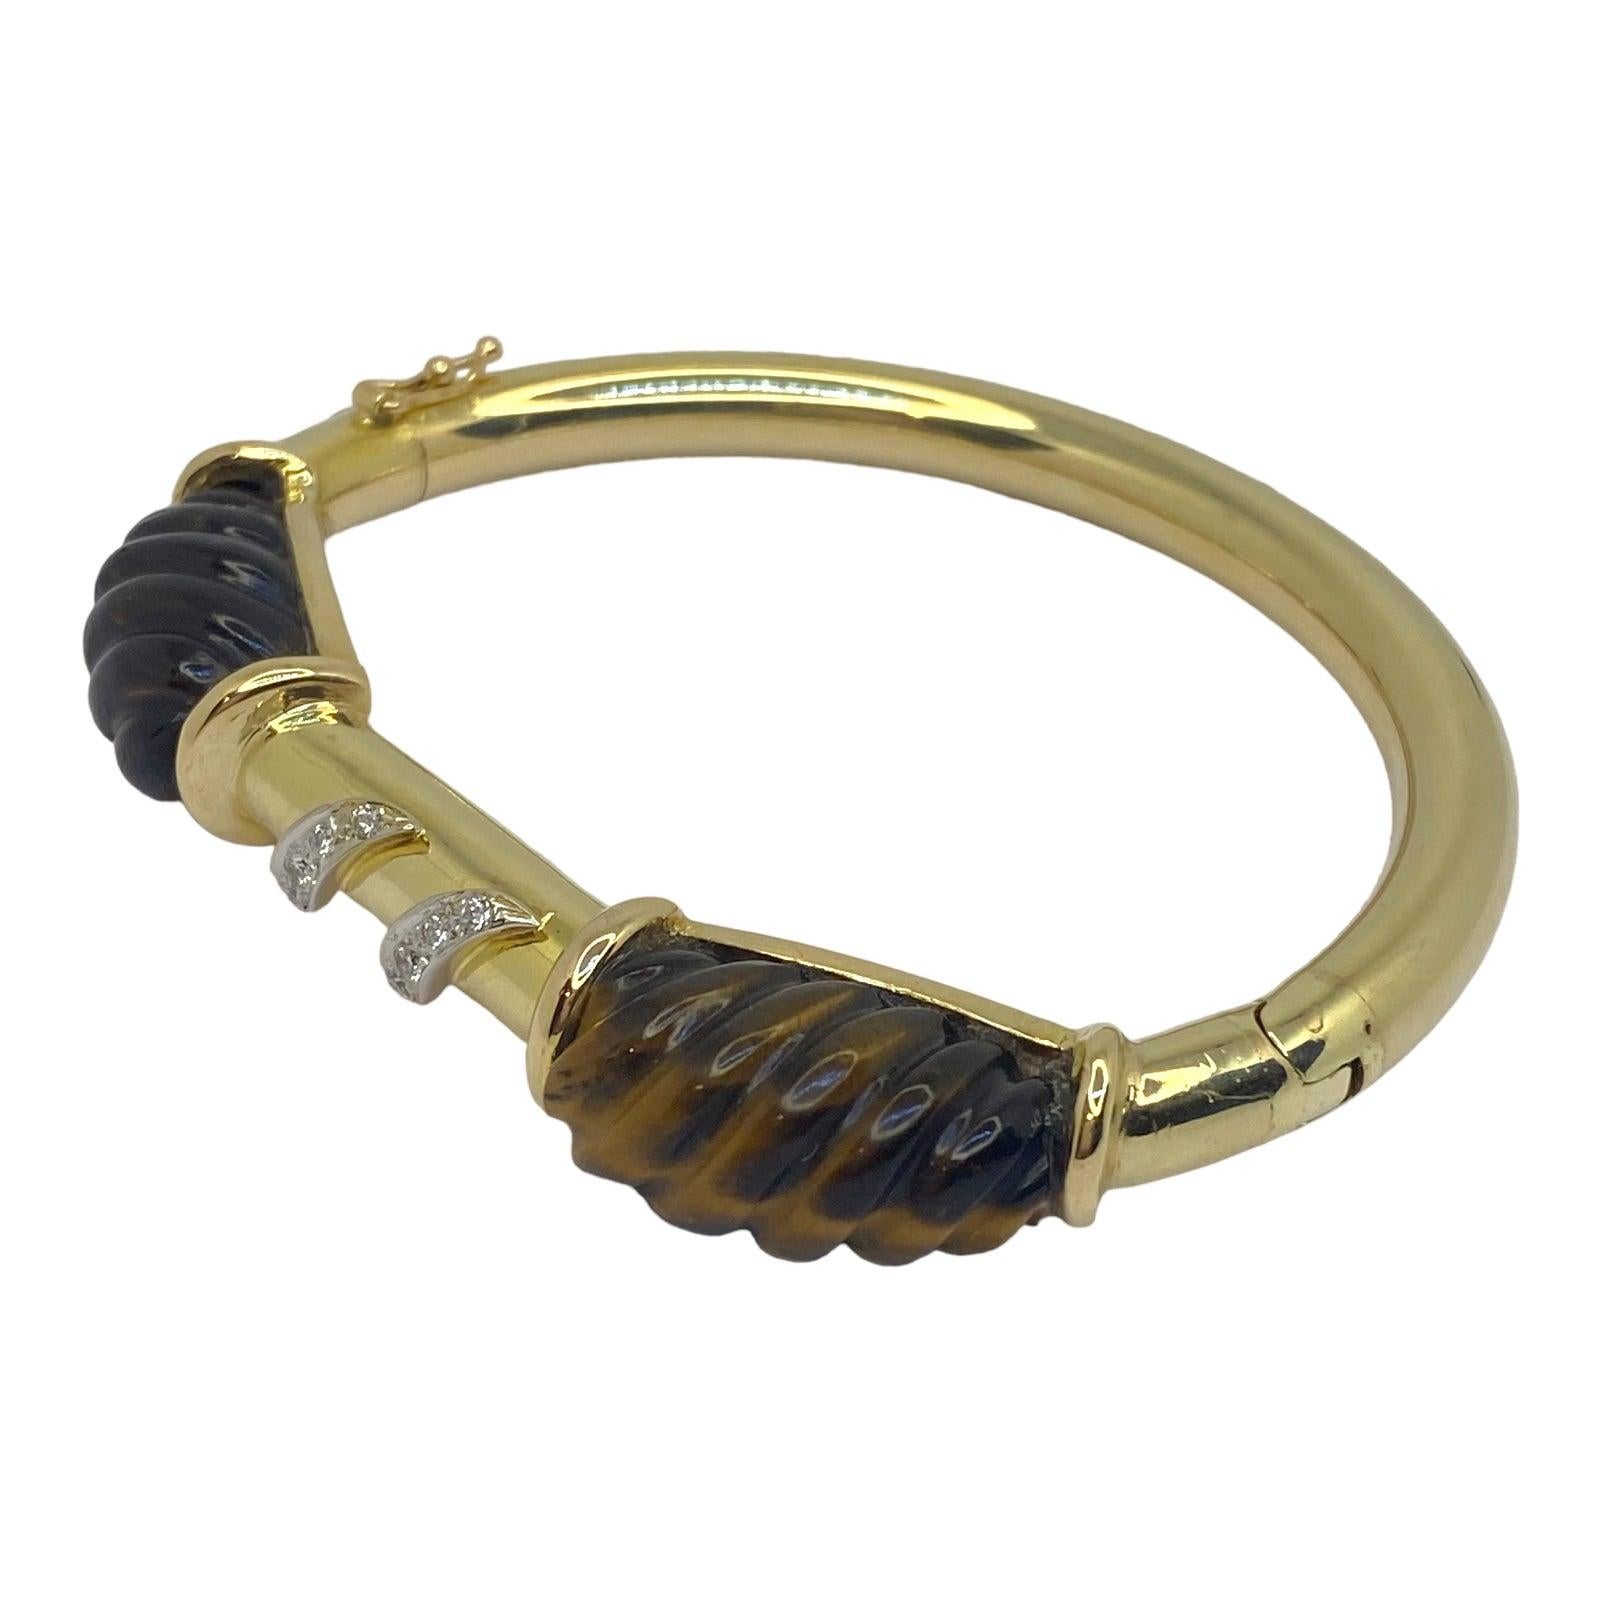 Vintage 14K yellow gold hinged bangle bracelet, featuring a tube design set with hand carved fluted tiger's eye gemstones framing two diamond set ribbons on the front. 
10 round brilliant cut diamonds: 0.25 ctw. Color: G-H, Clarity: